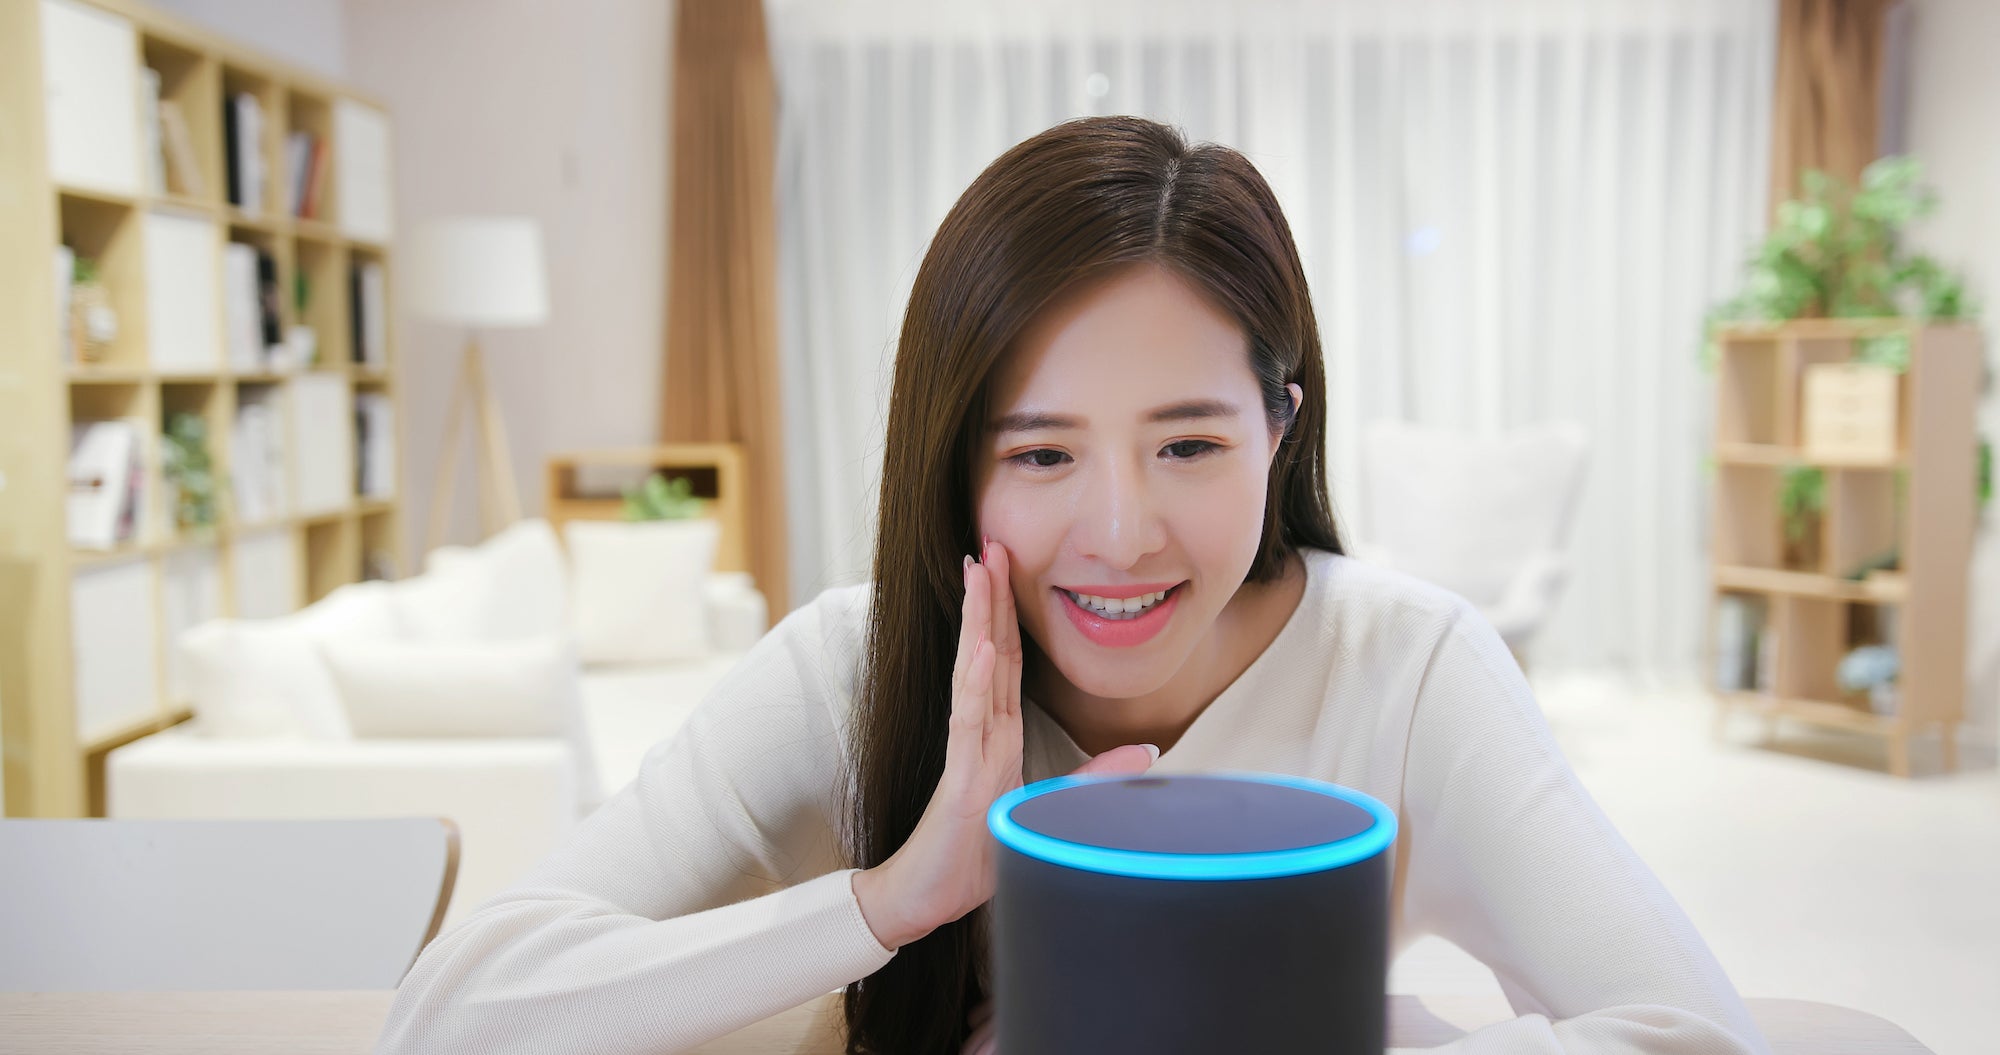 Woman speaking into her Alexa device. ˽̳ Davis researchers have found that people speak differently when talking with voice artificial intelligence.